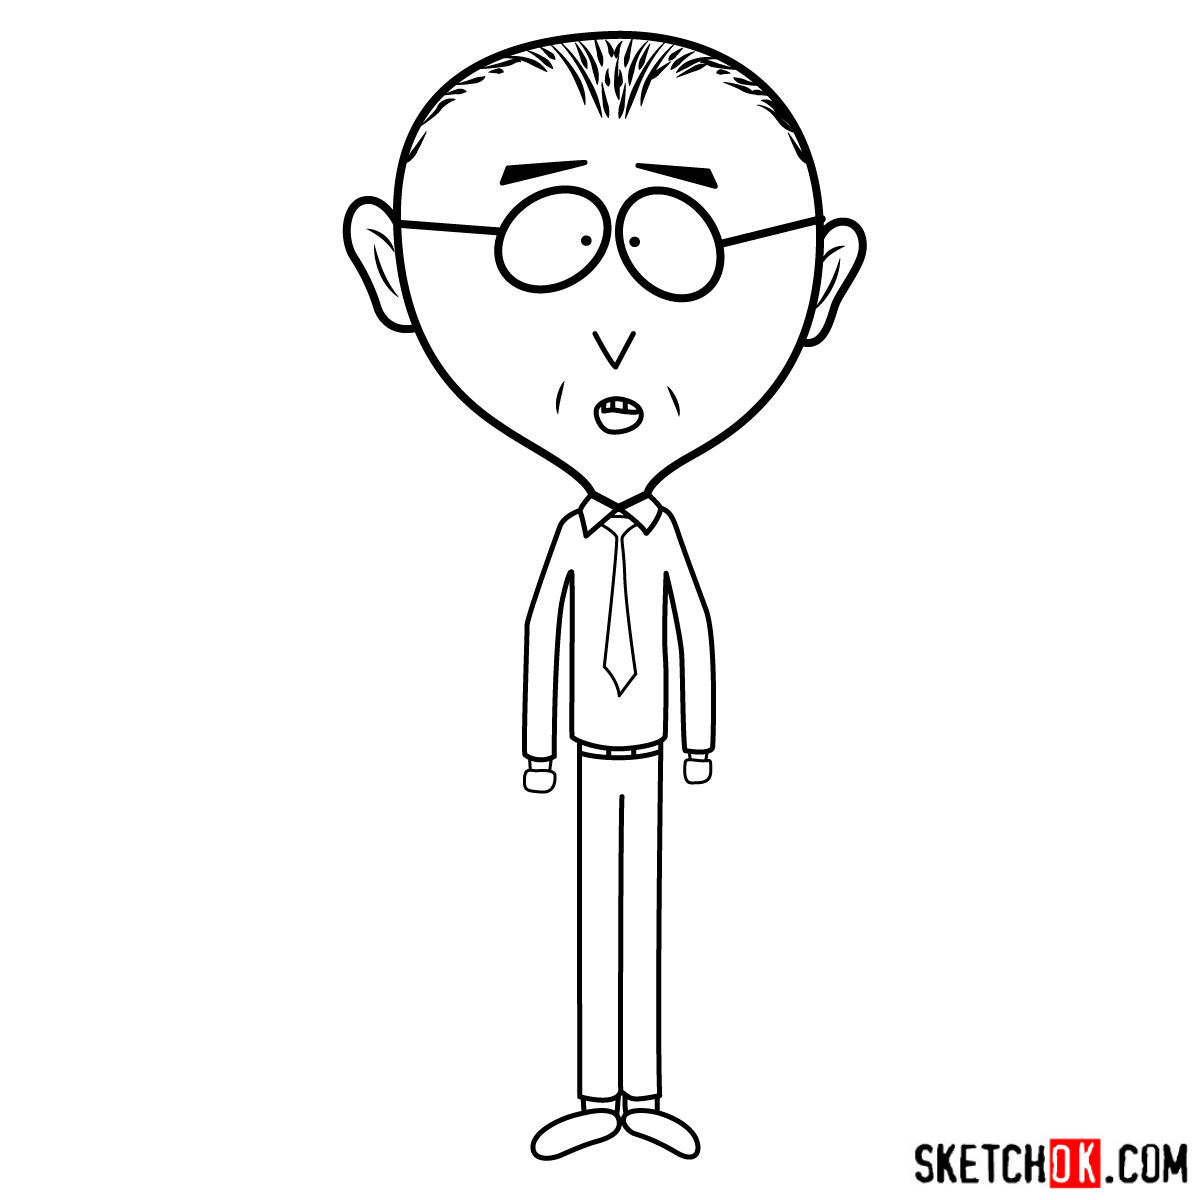 How to draw Mr. Mackey from South Park - step 09